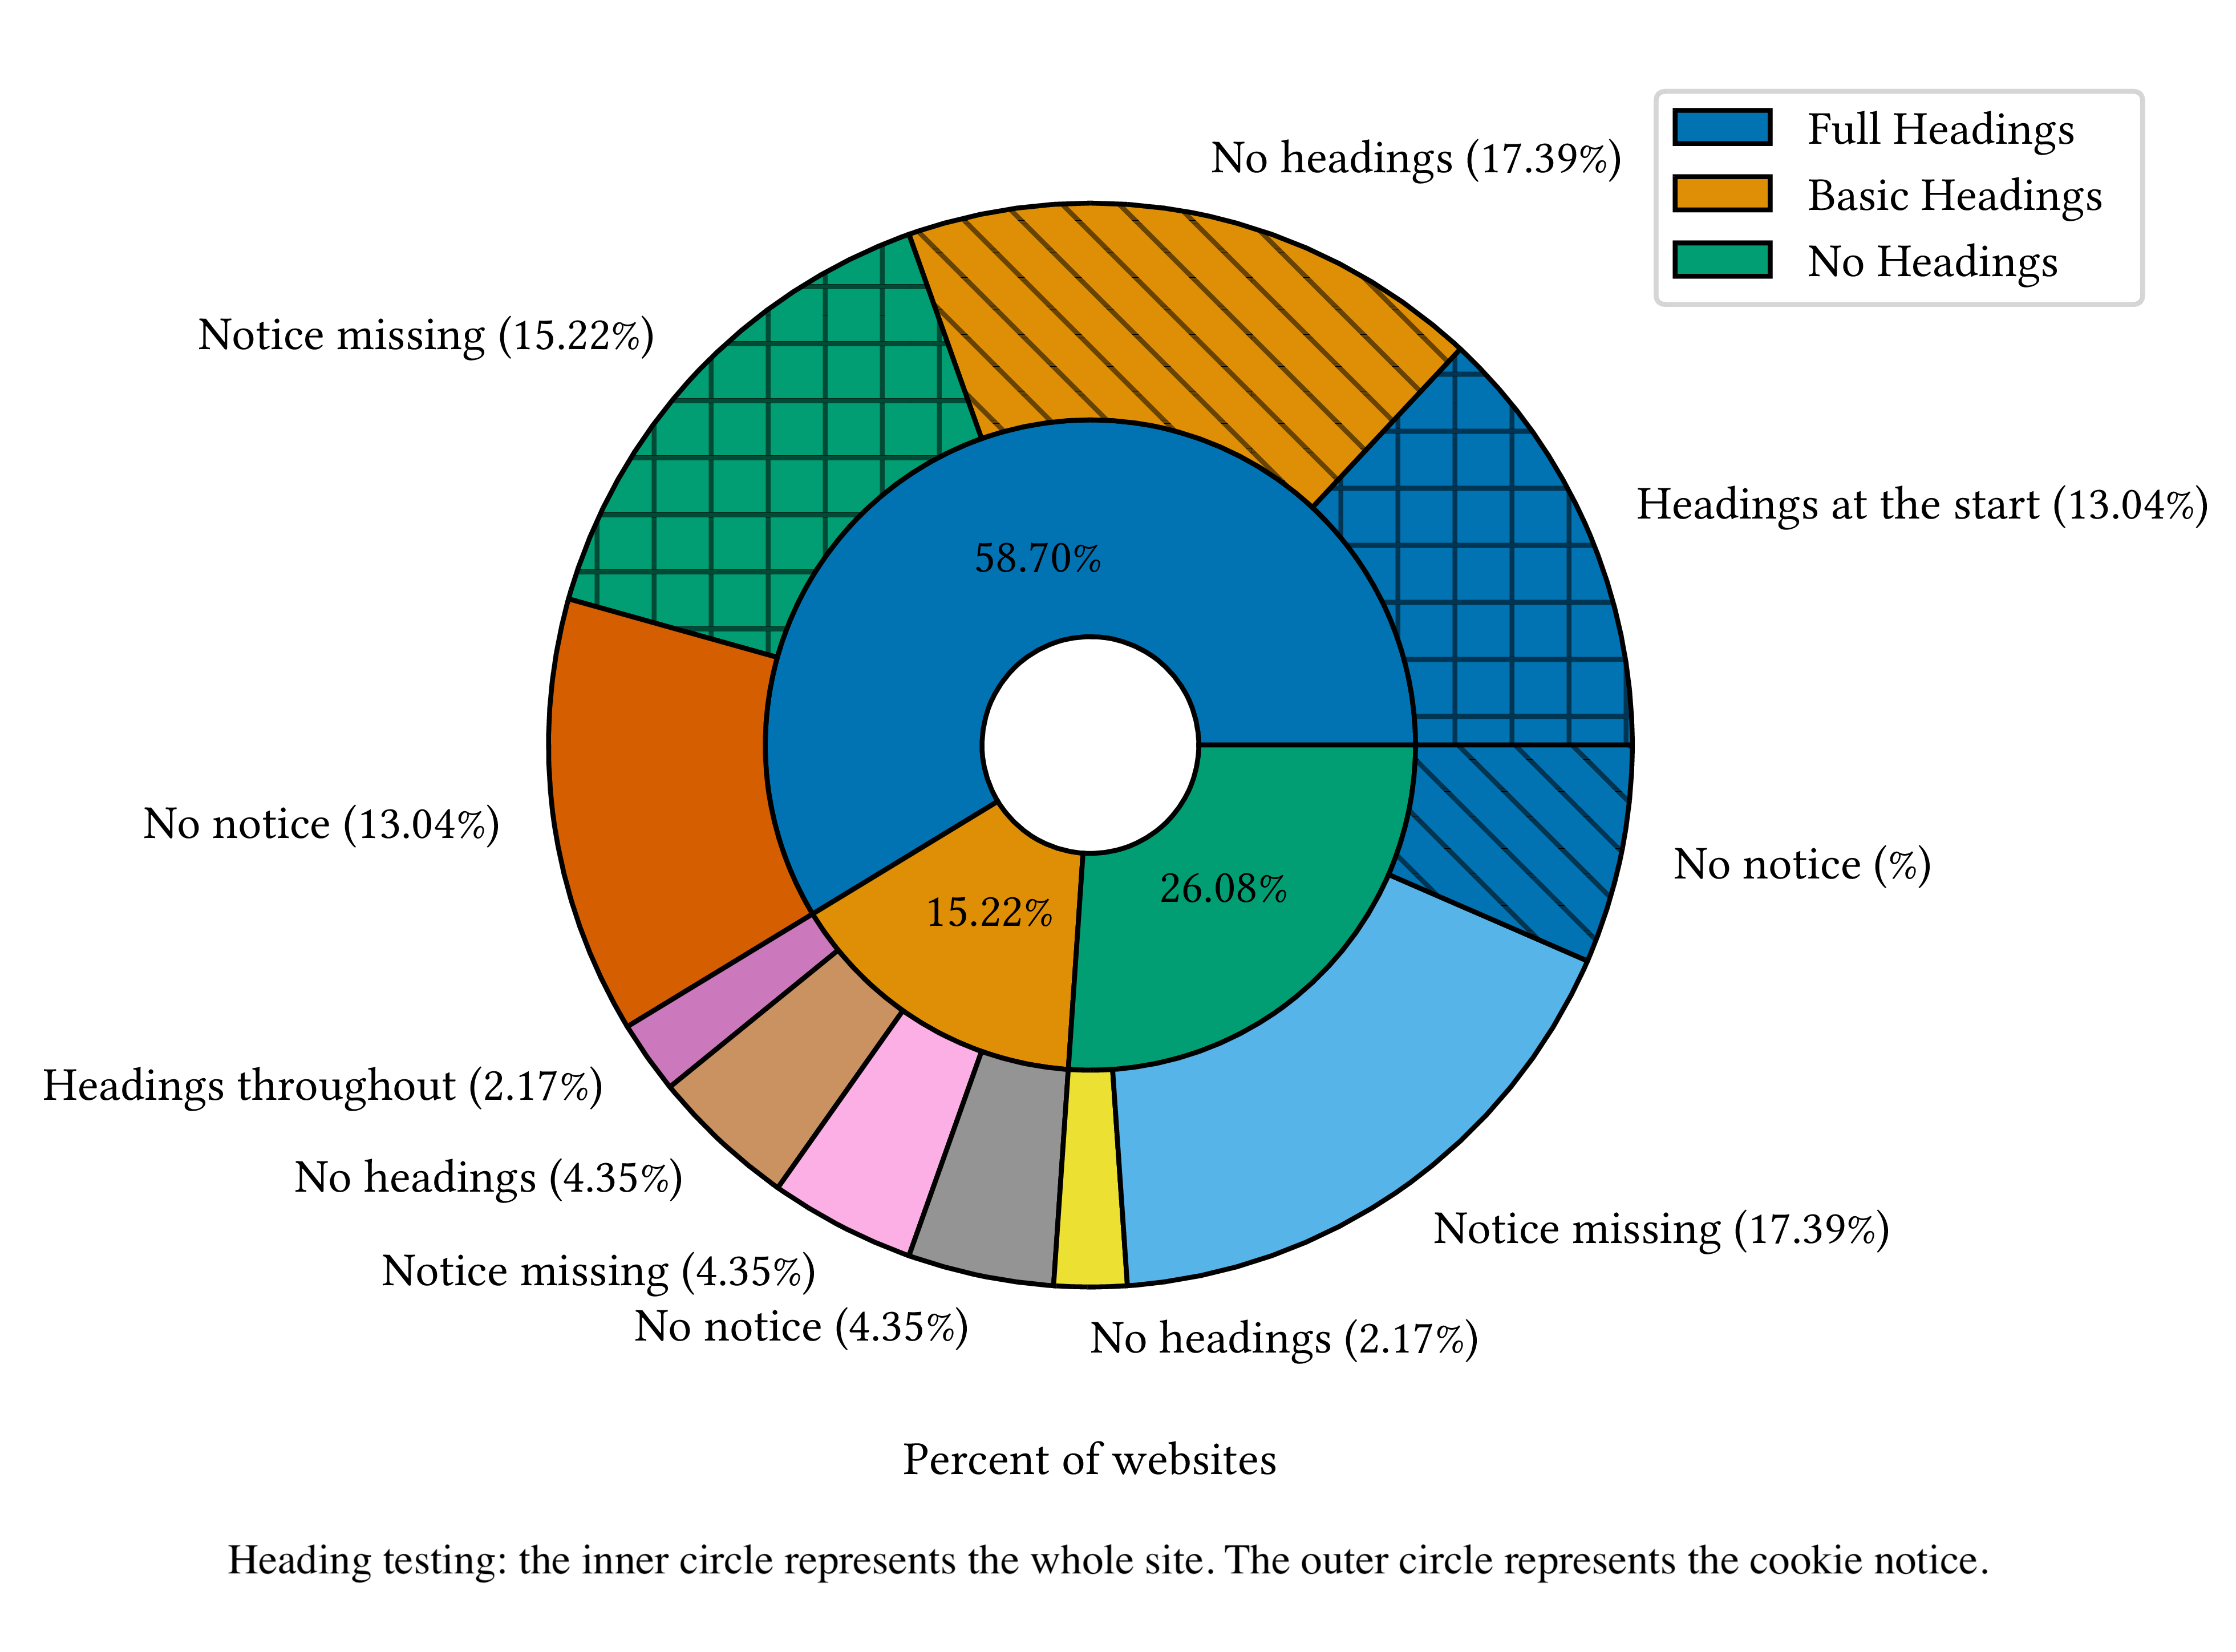 Sunburst chart showing results for manual WebbIE testing, with the inner circle representing the whole webpage and the outer representing the cookie notice. The values for the inner circle are: Full Headings (58.70%), Basic Headings (15.22%), None (26.09%). Outer circle values for Full Headings: Headings at the start (13.04%), No headings (17.39%), Notice missing (15.22%), No notice (13.04%). Outer circle values for Basic headings: Headings throughout (2.17%), No headings (4.35%), Notice missing (4.35%), No notice (4.35%). Outer circle values for No headings: Notice missing (17.39%), No headings (2.17%), No notice (6.52%).